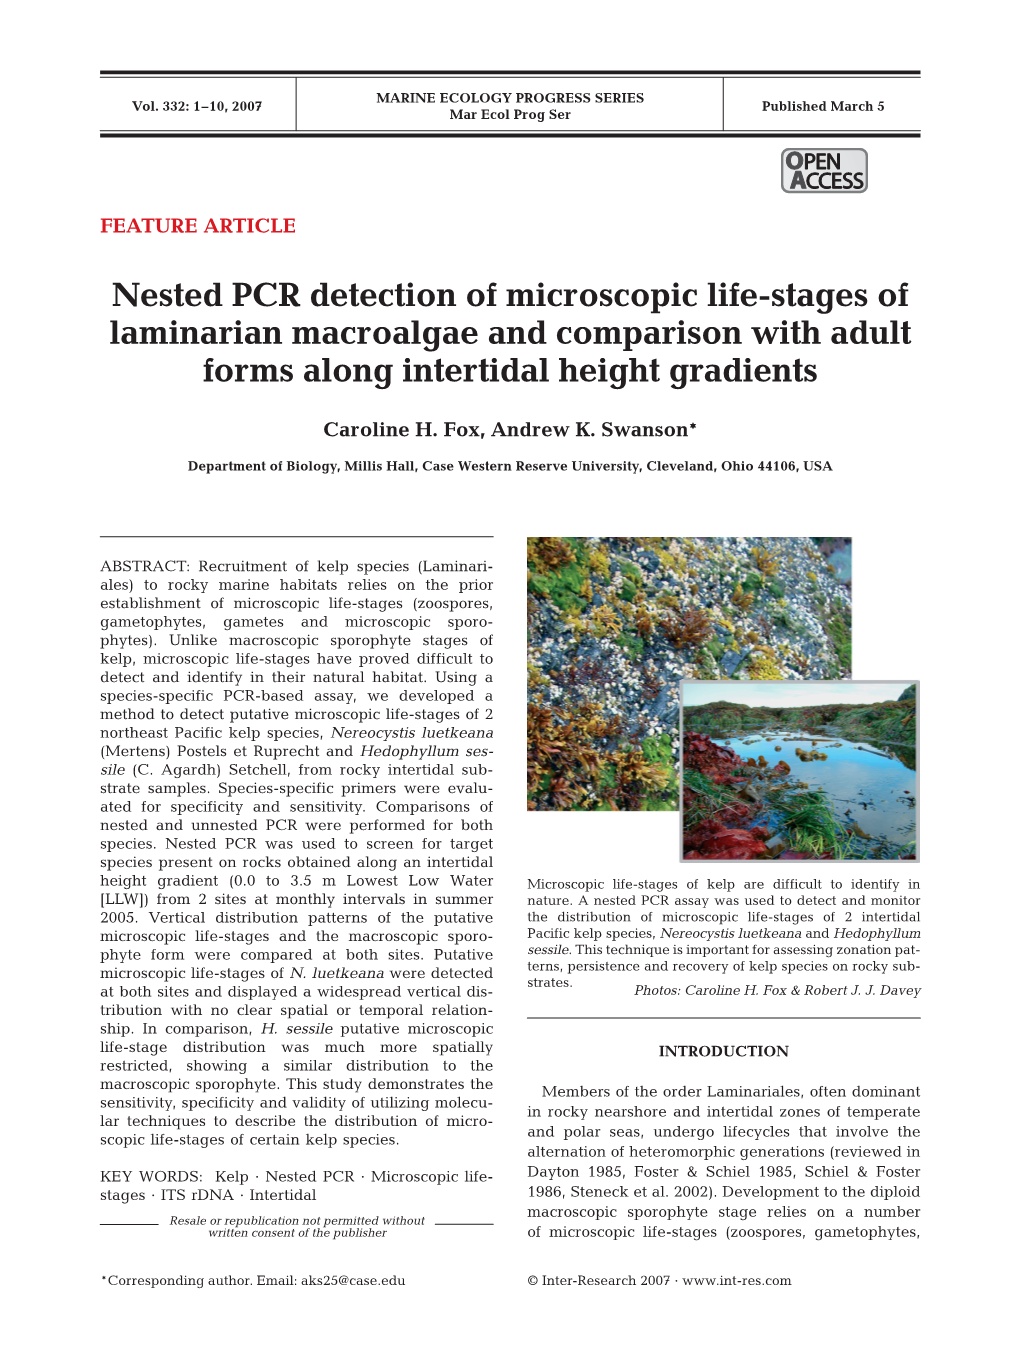 Nested PCR Detection of Microscopic Life-Stages of Laminarian Macroalgae and Comparison with Adult Forms Along Intertidal Height Gradients